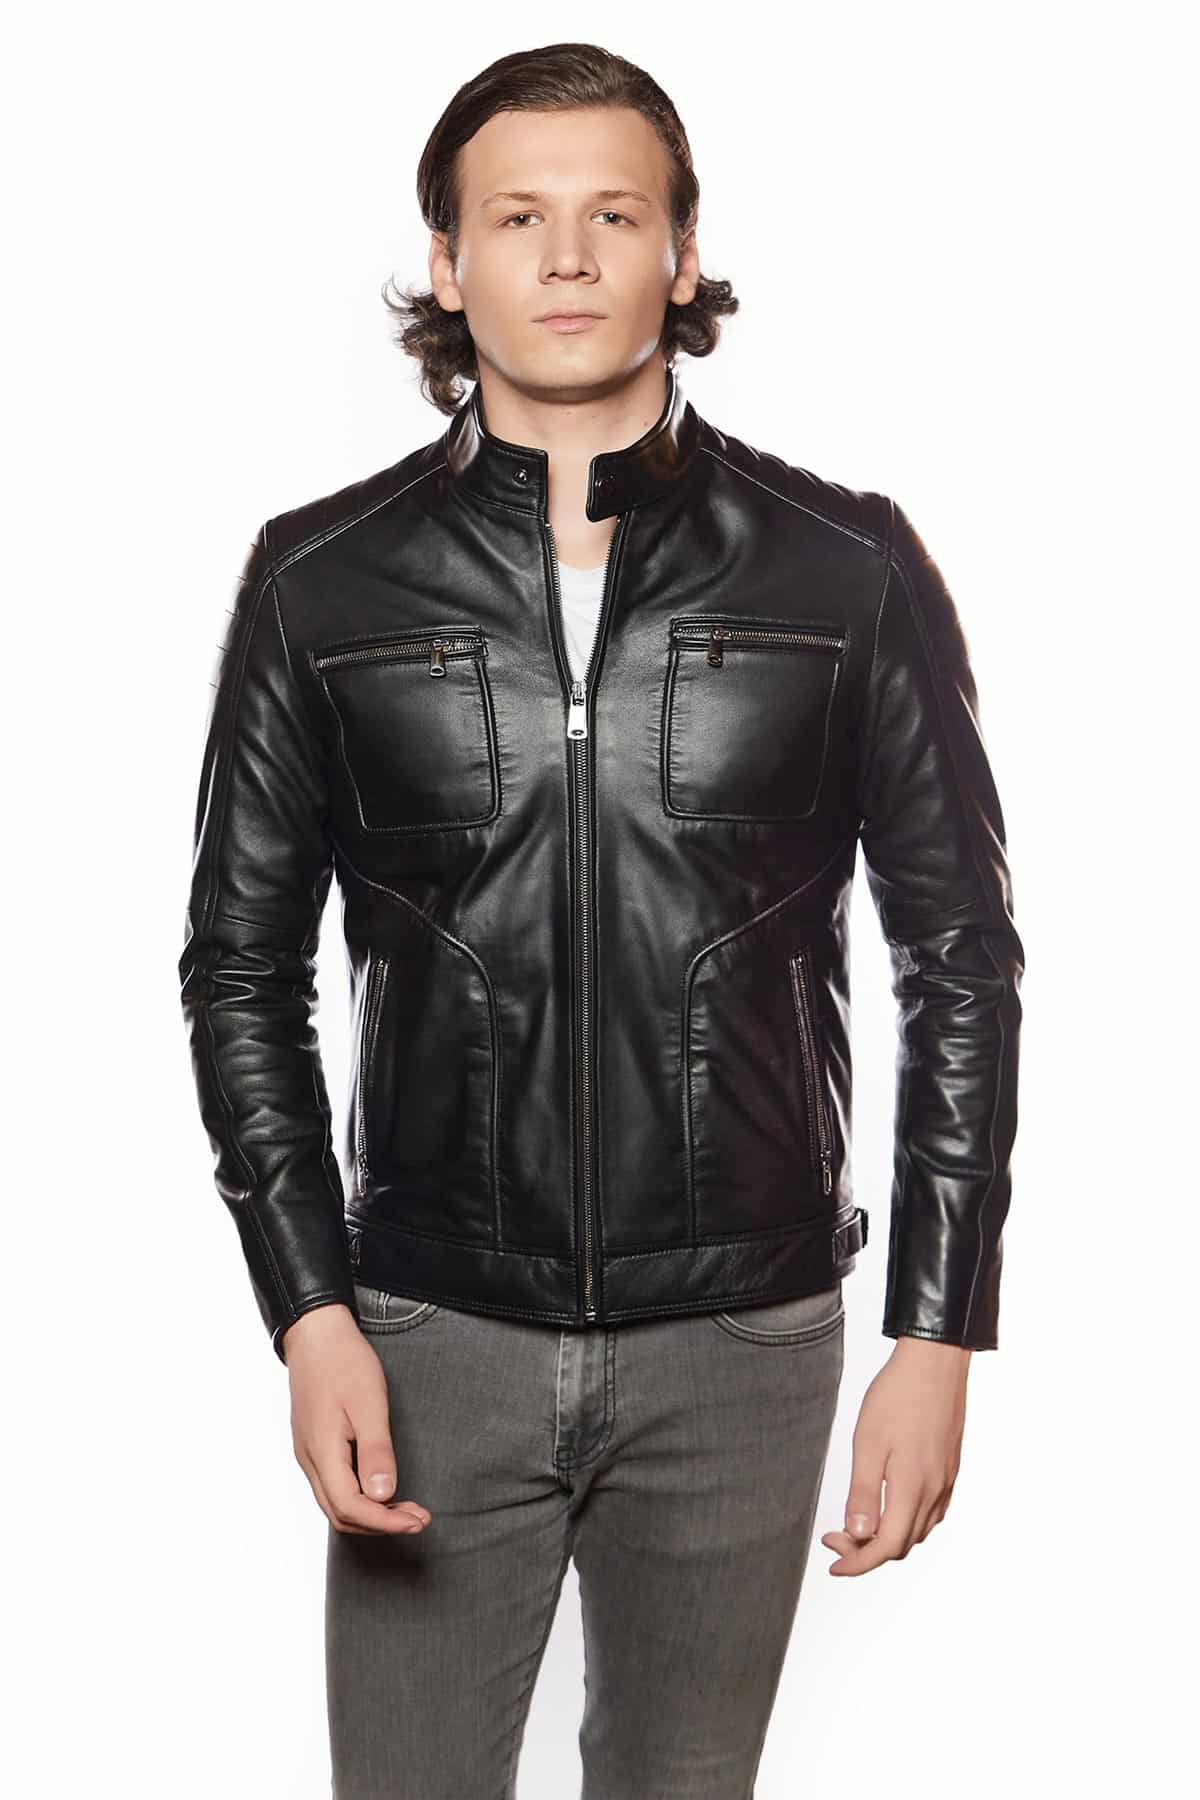 mens black leather trench coat